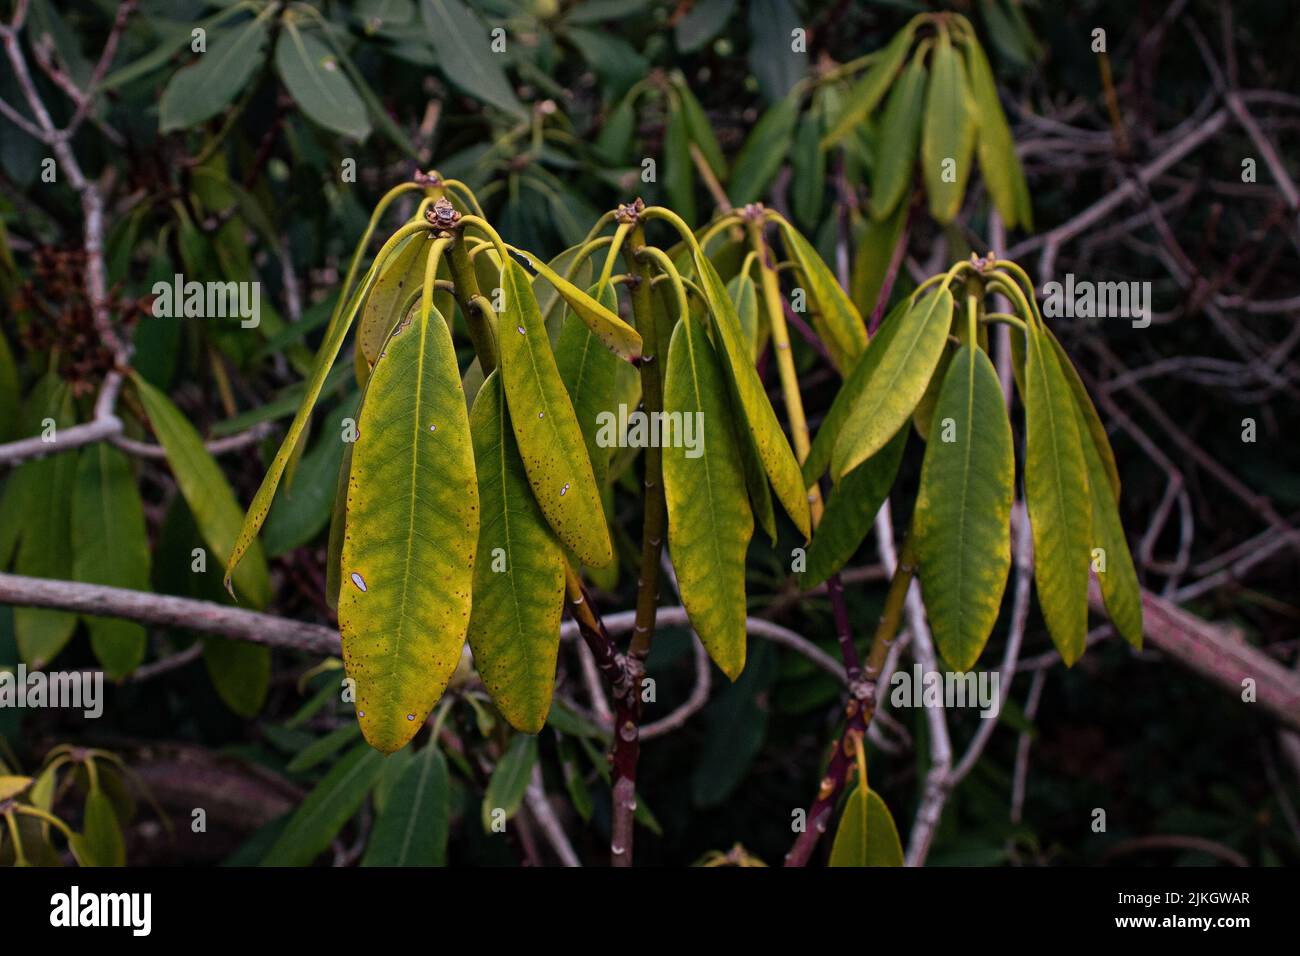 The green leaves growing on the tree branches in the wild Stock Photo